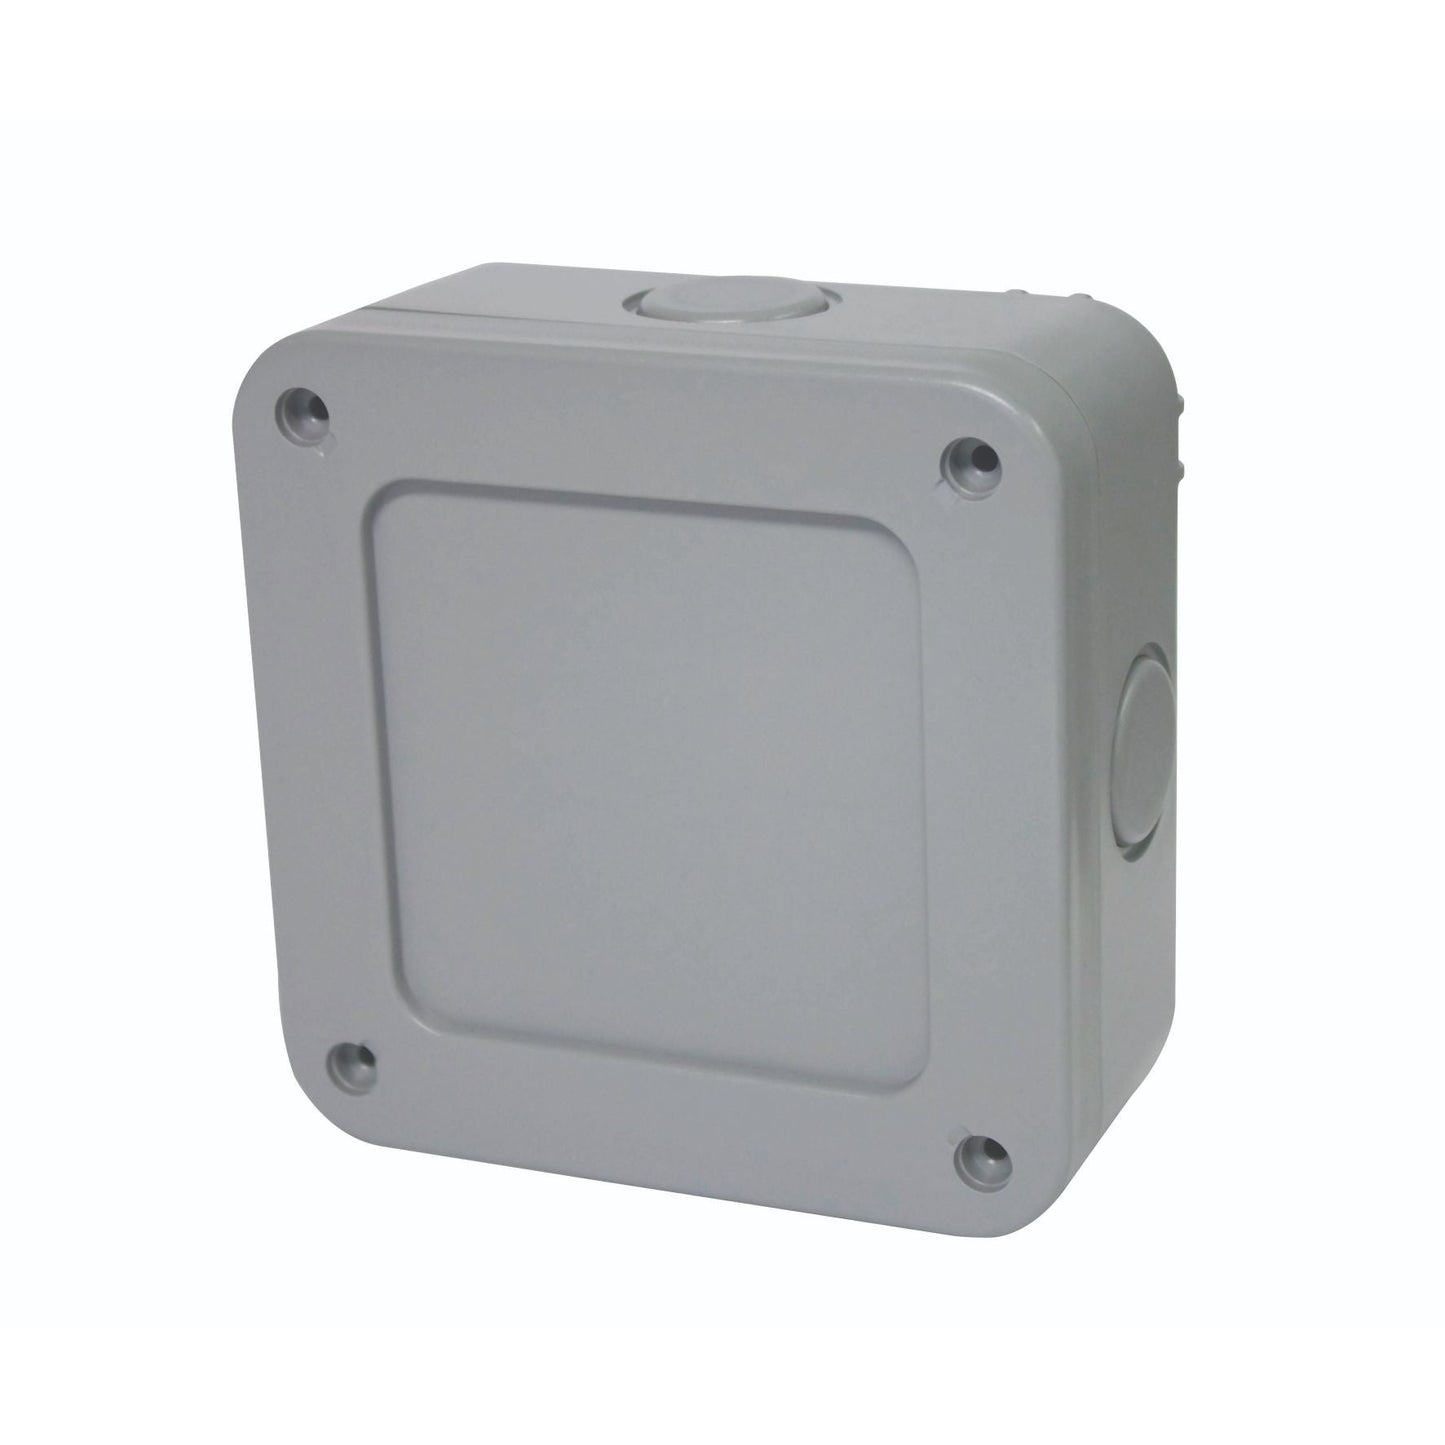 IP66 HEAVY DUTY OUTDOOR SQUARE JUNCTION BOX